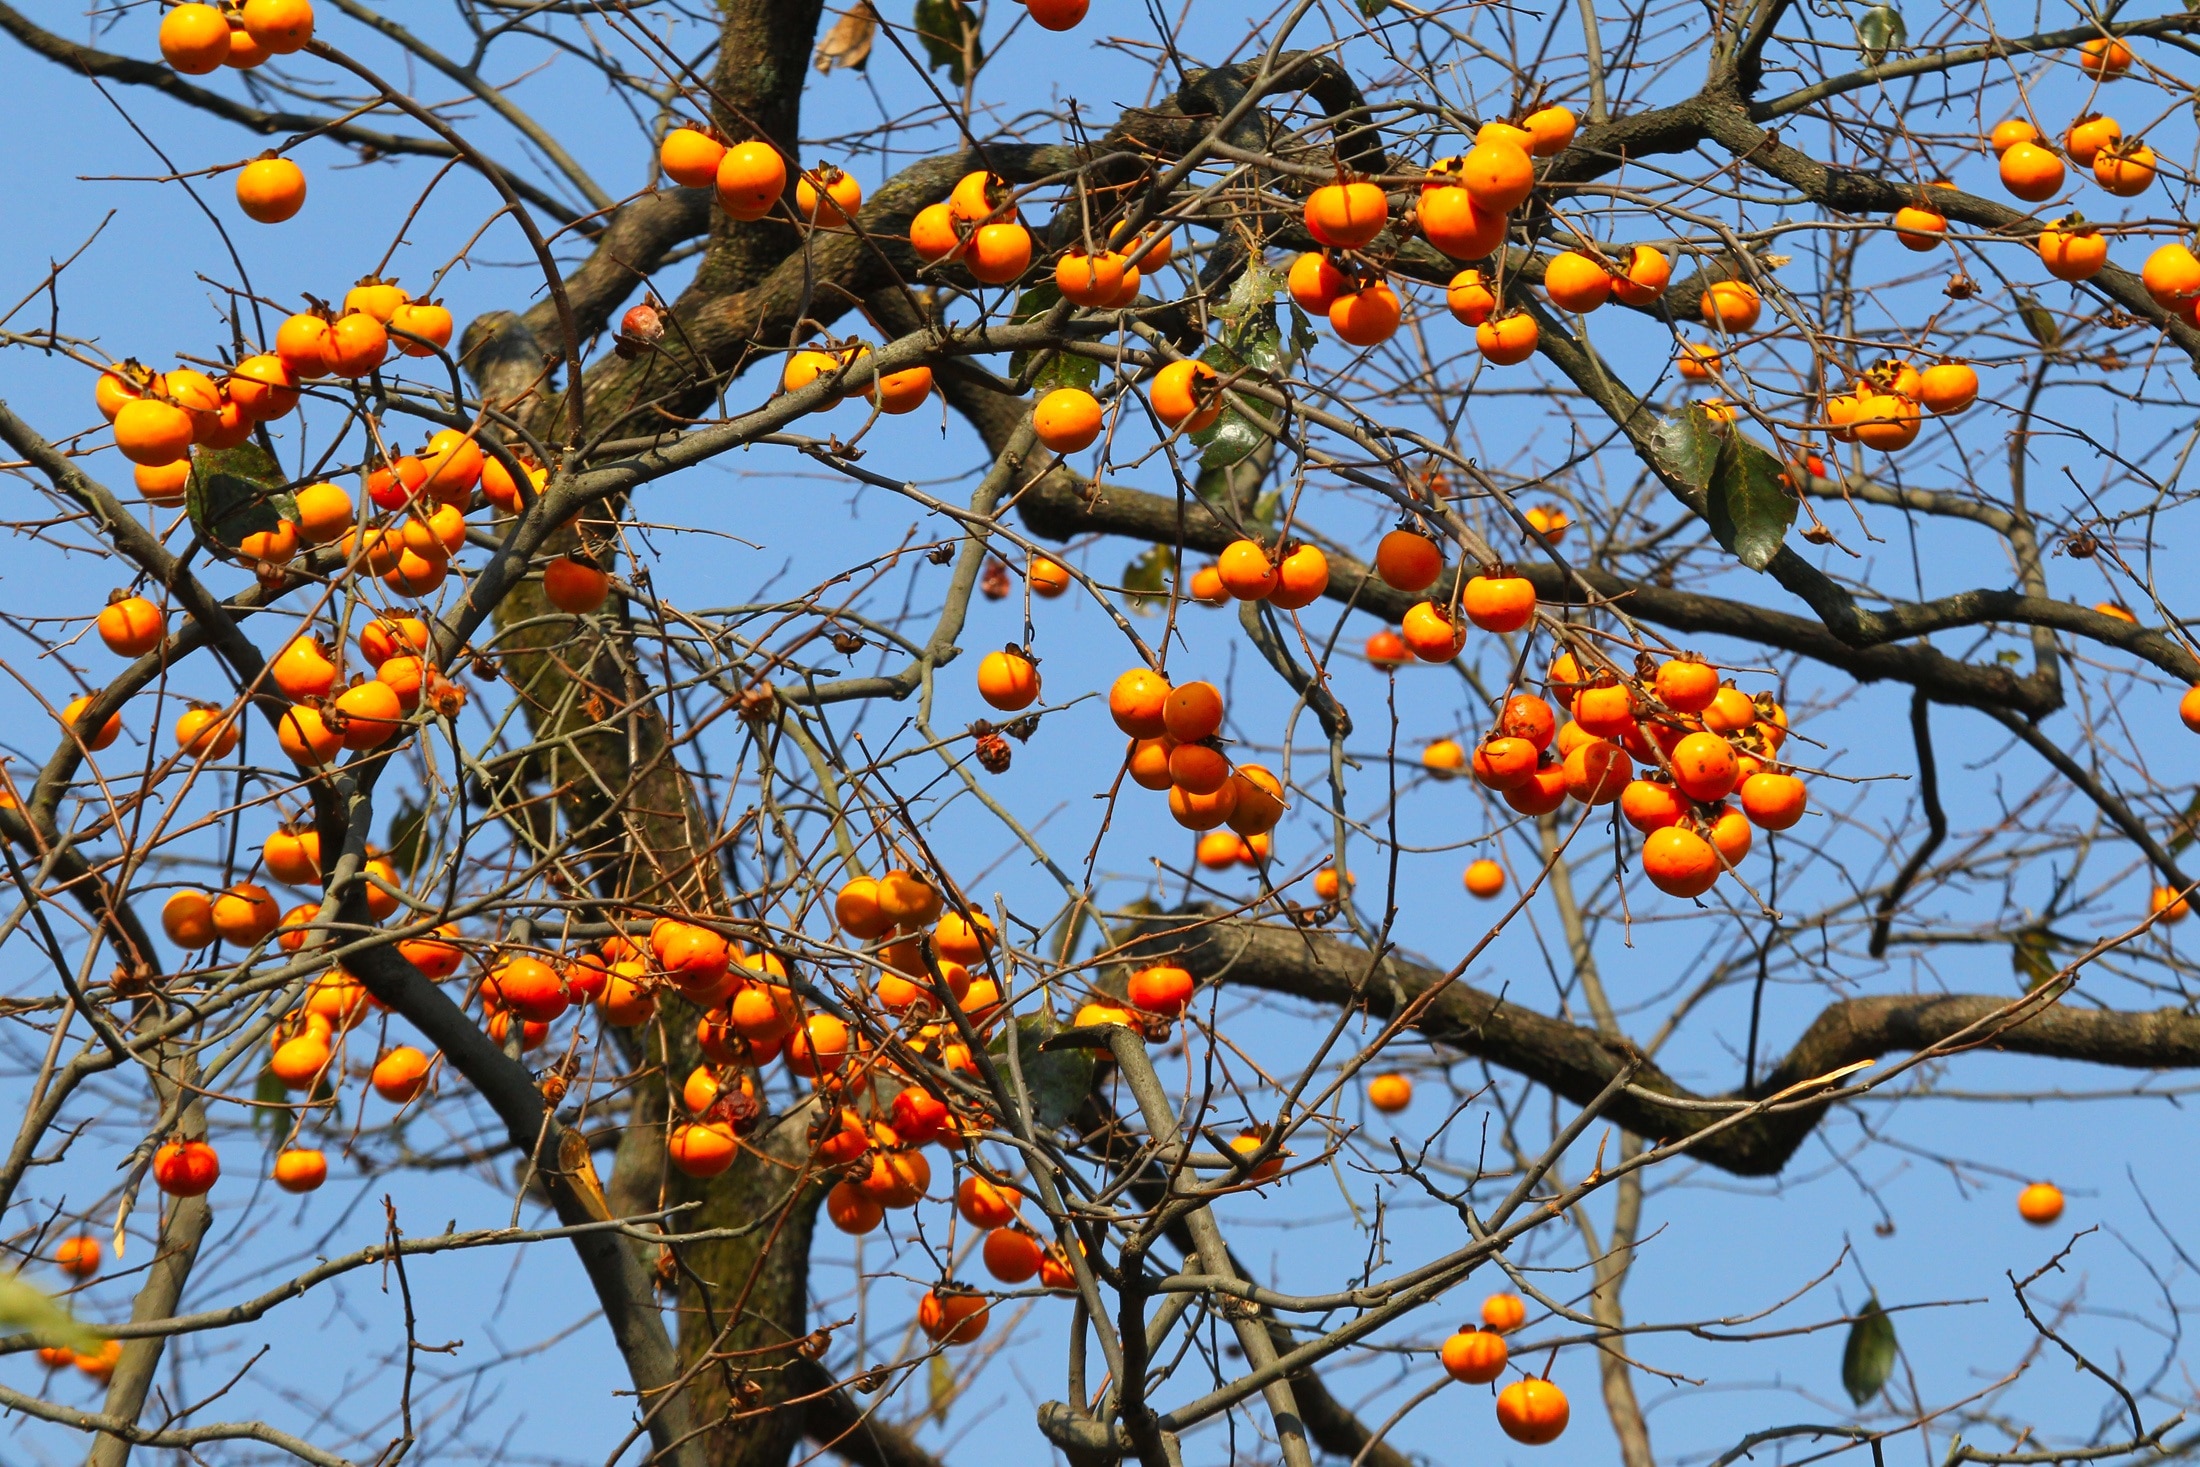 oranges in bear tree during day time